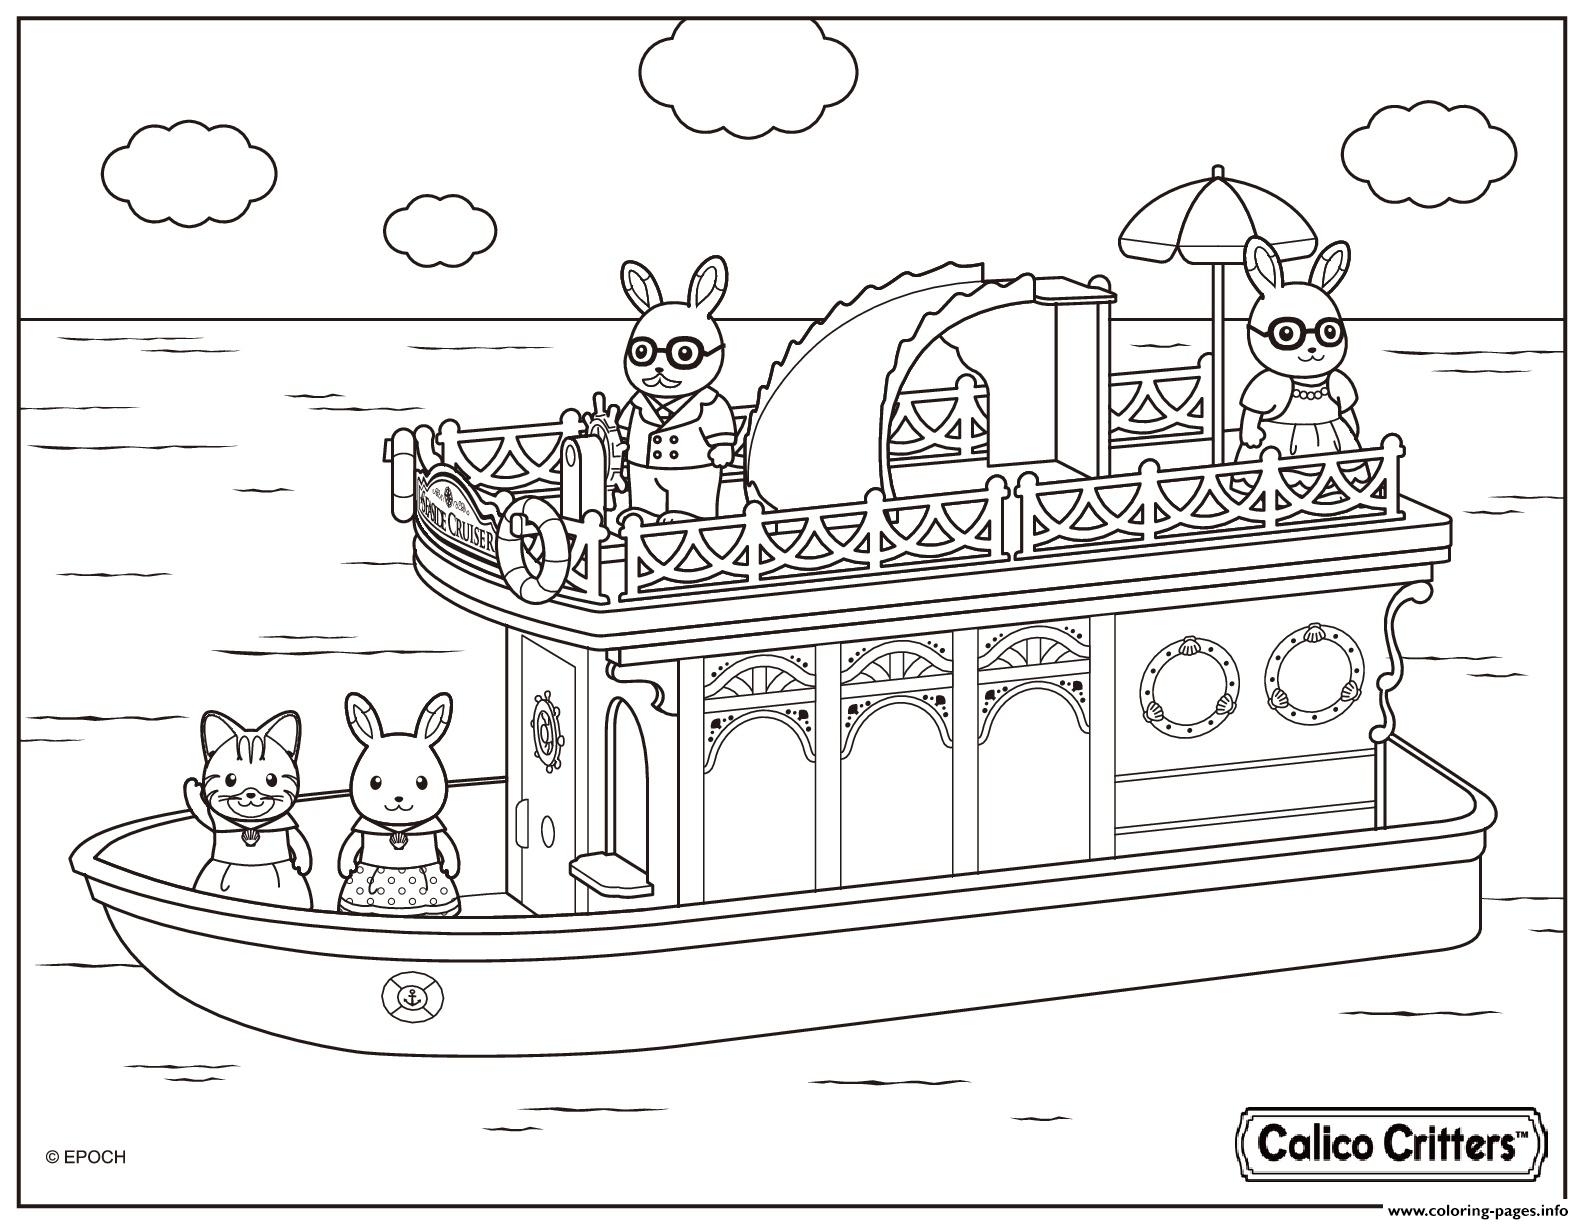 Calico Critters Having Fun On The Boat coloring